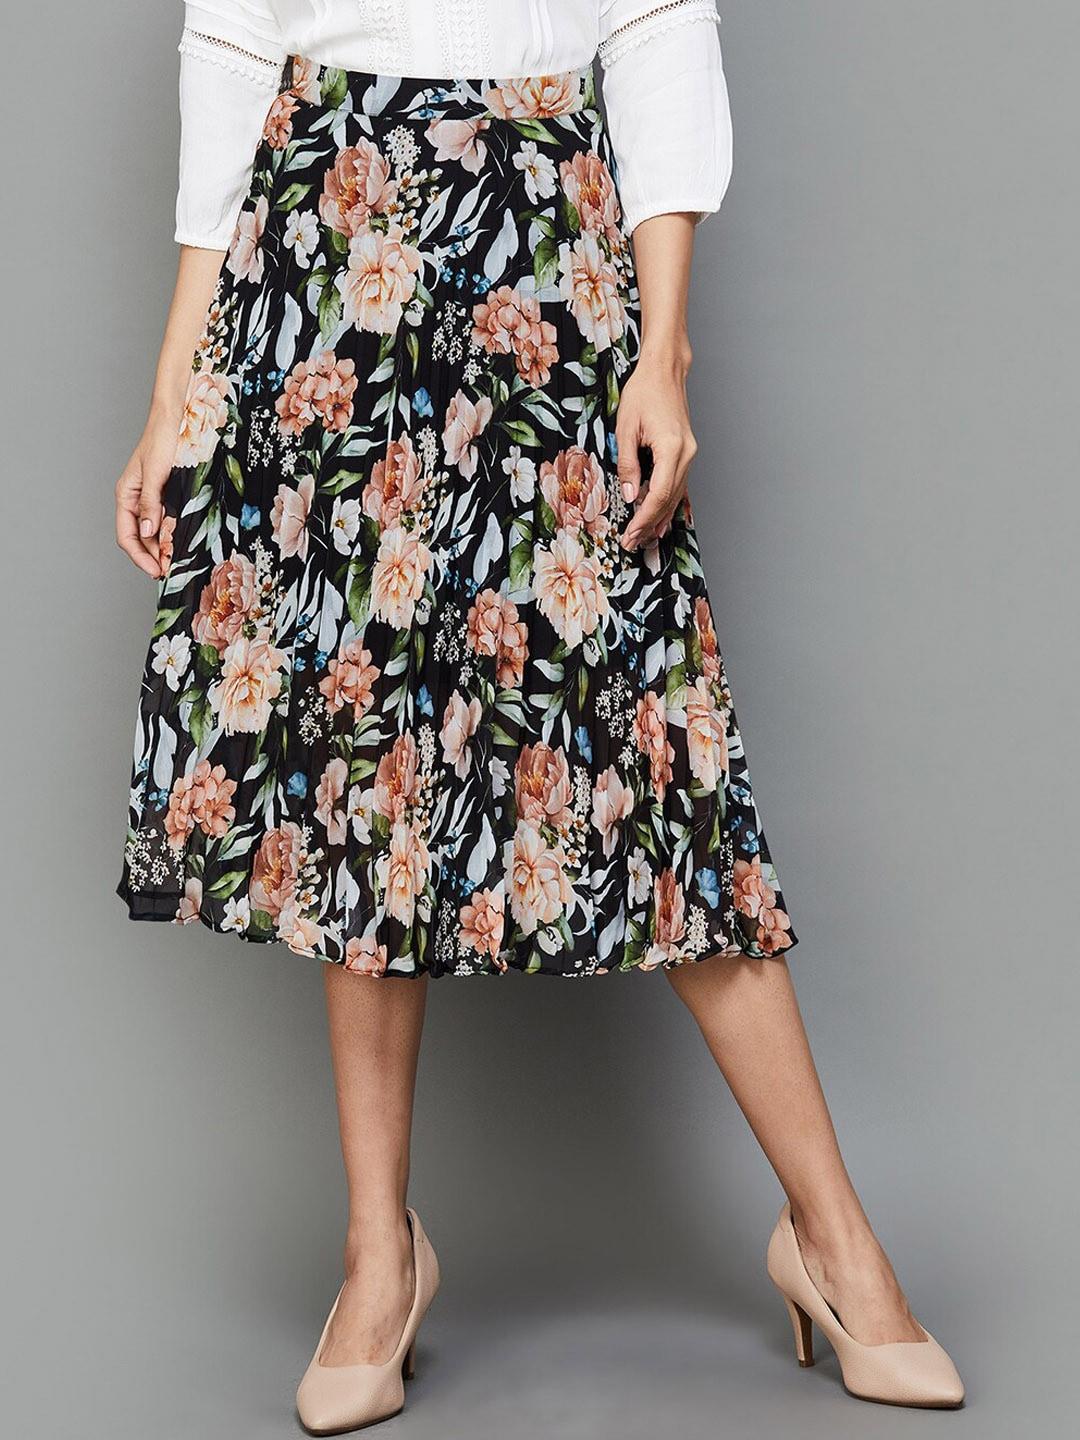 CODE by Lifestyle Floral Printed Flared Midi Skirt